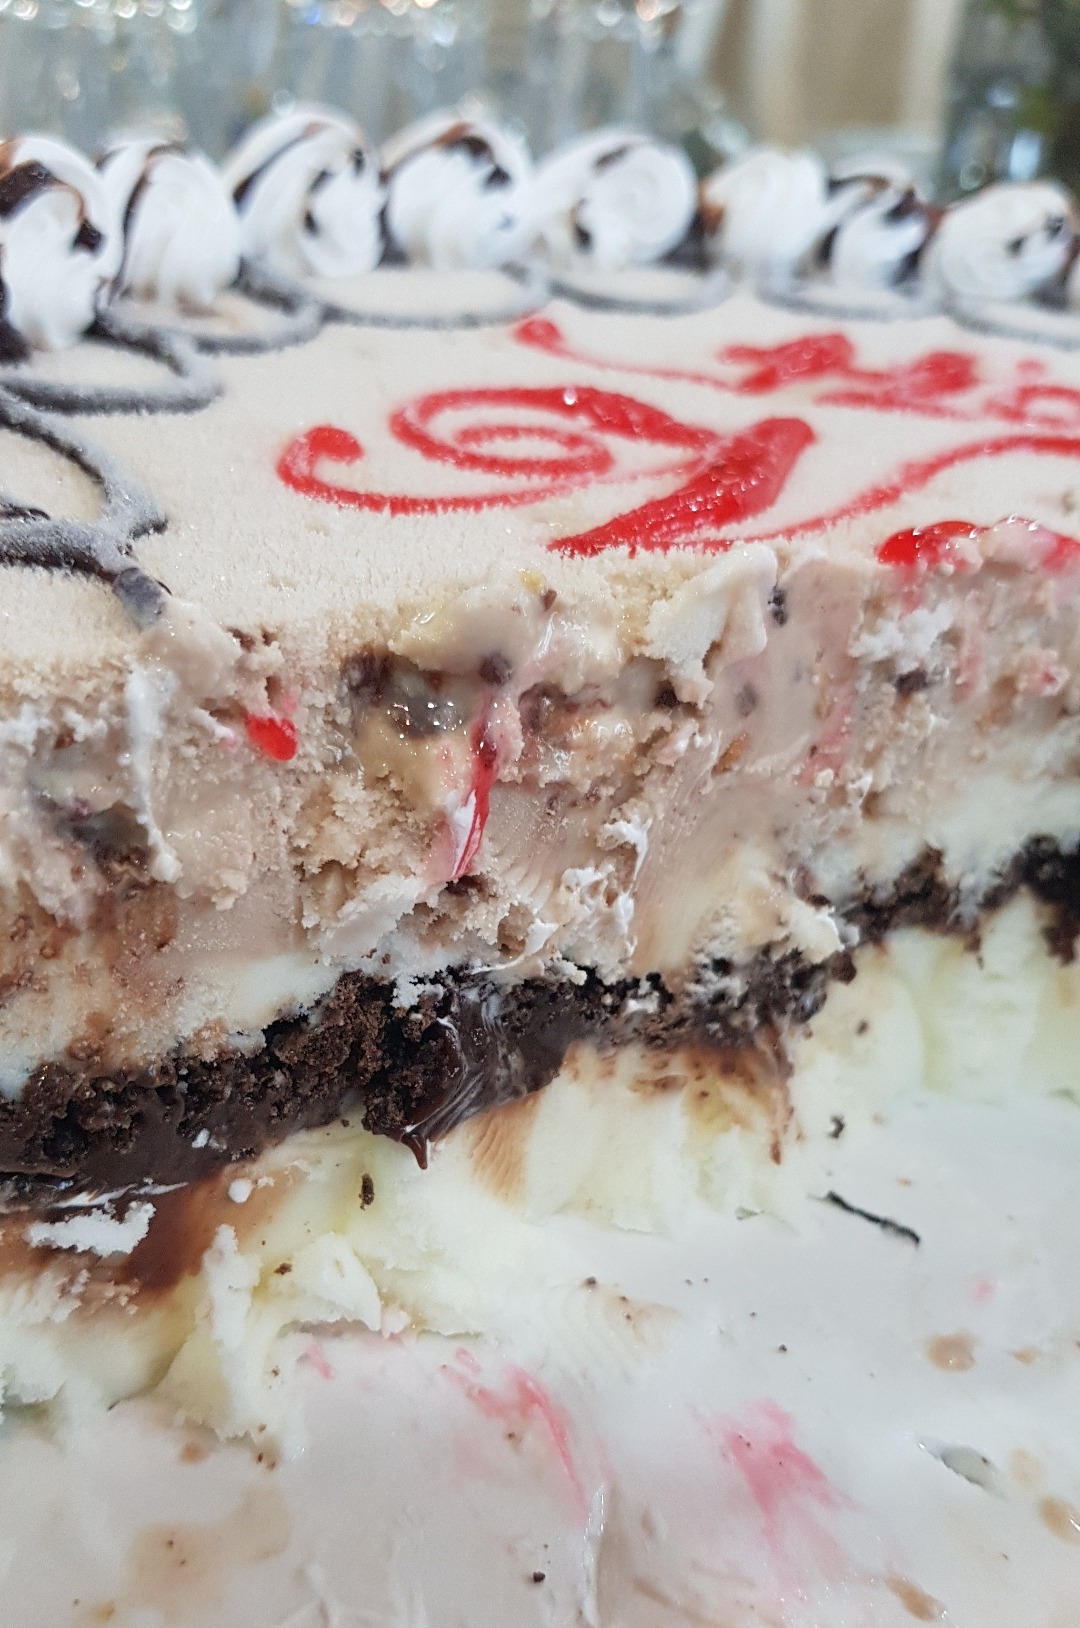 snickers #icecream cake @ Dairy Queen (DQ) - Bahrain